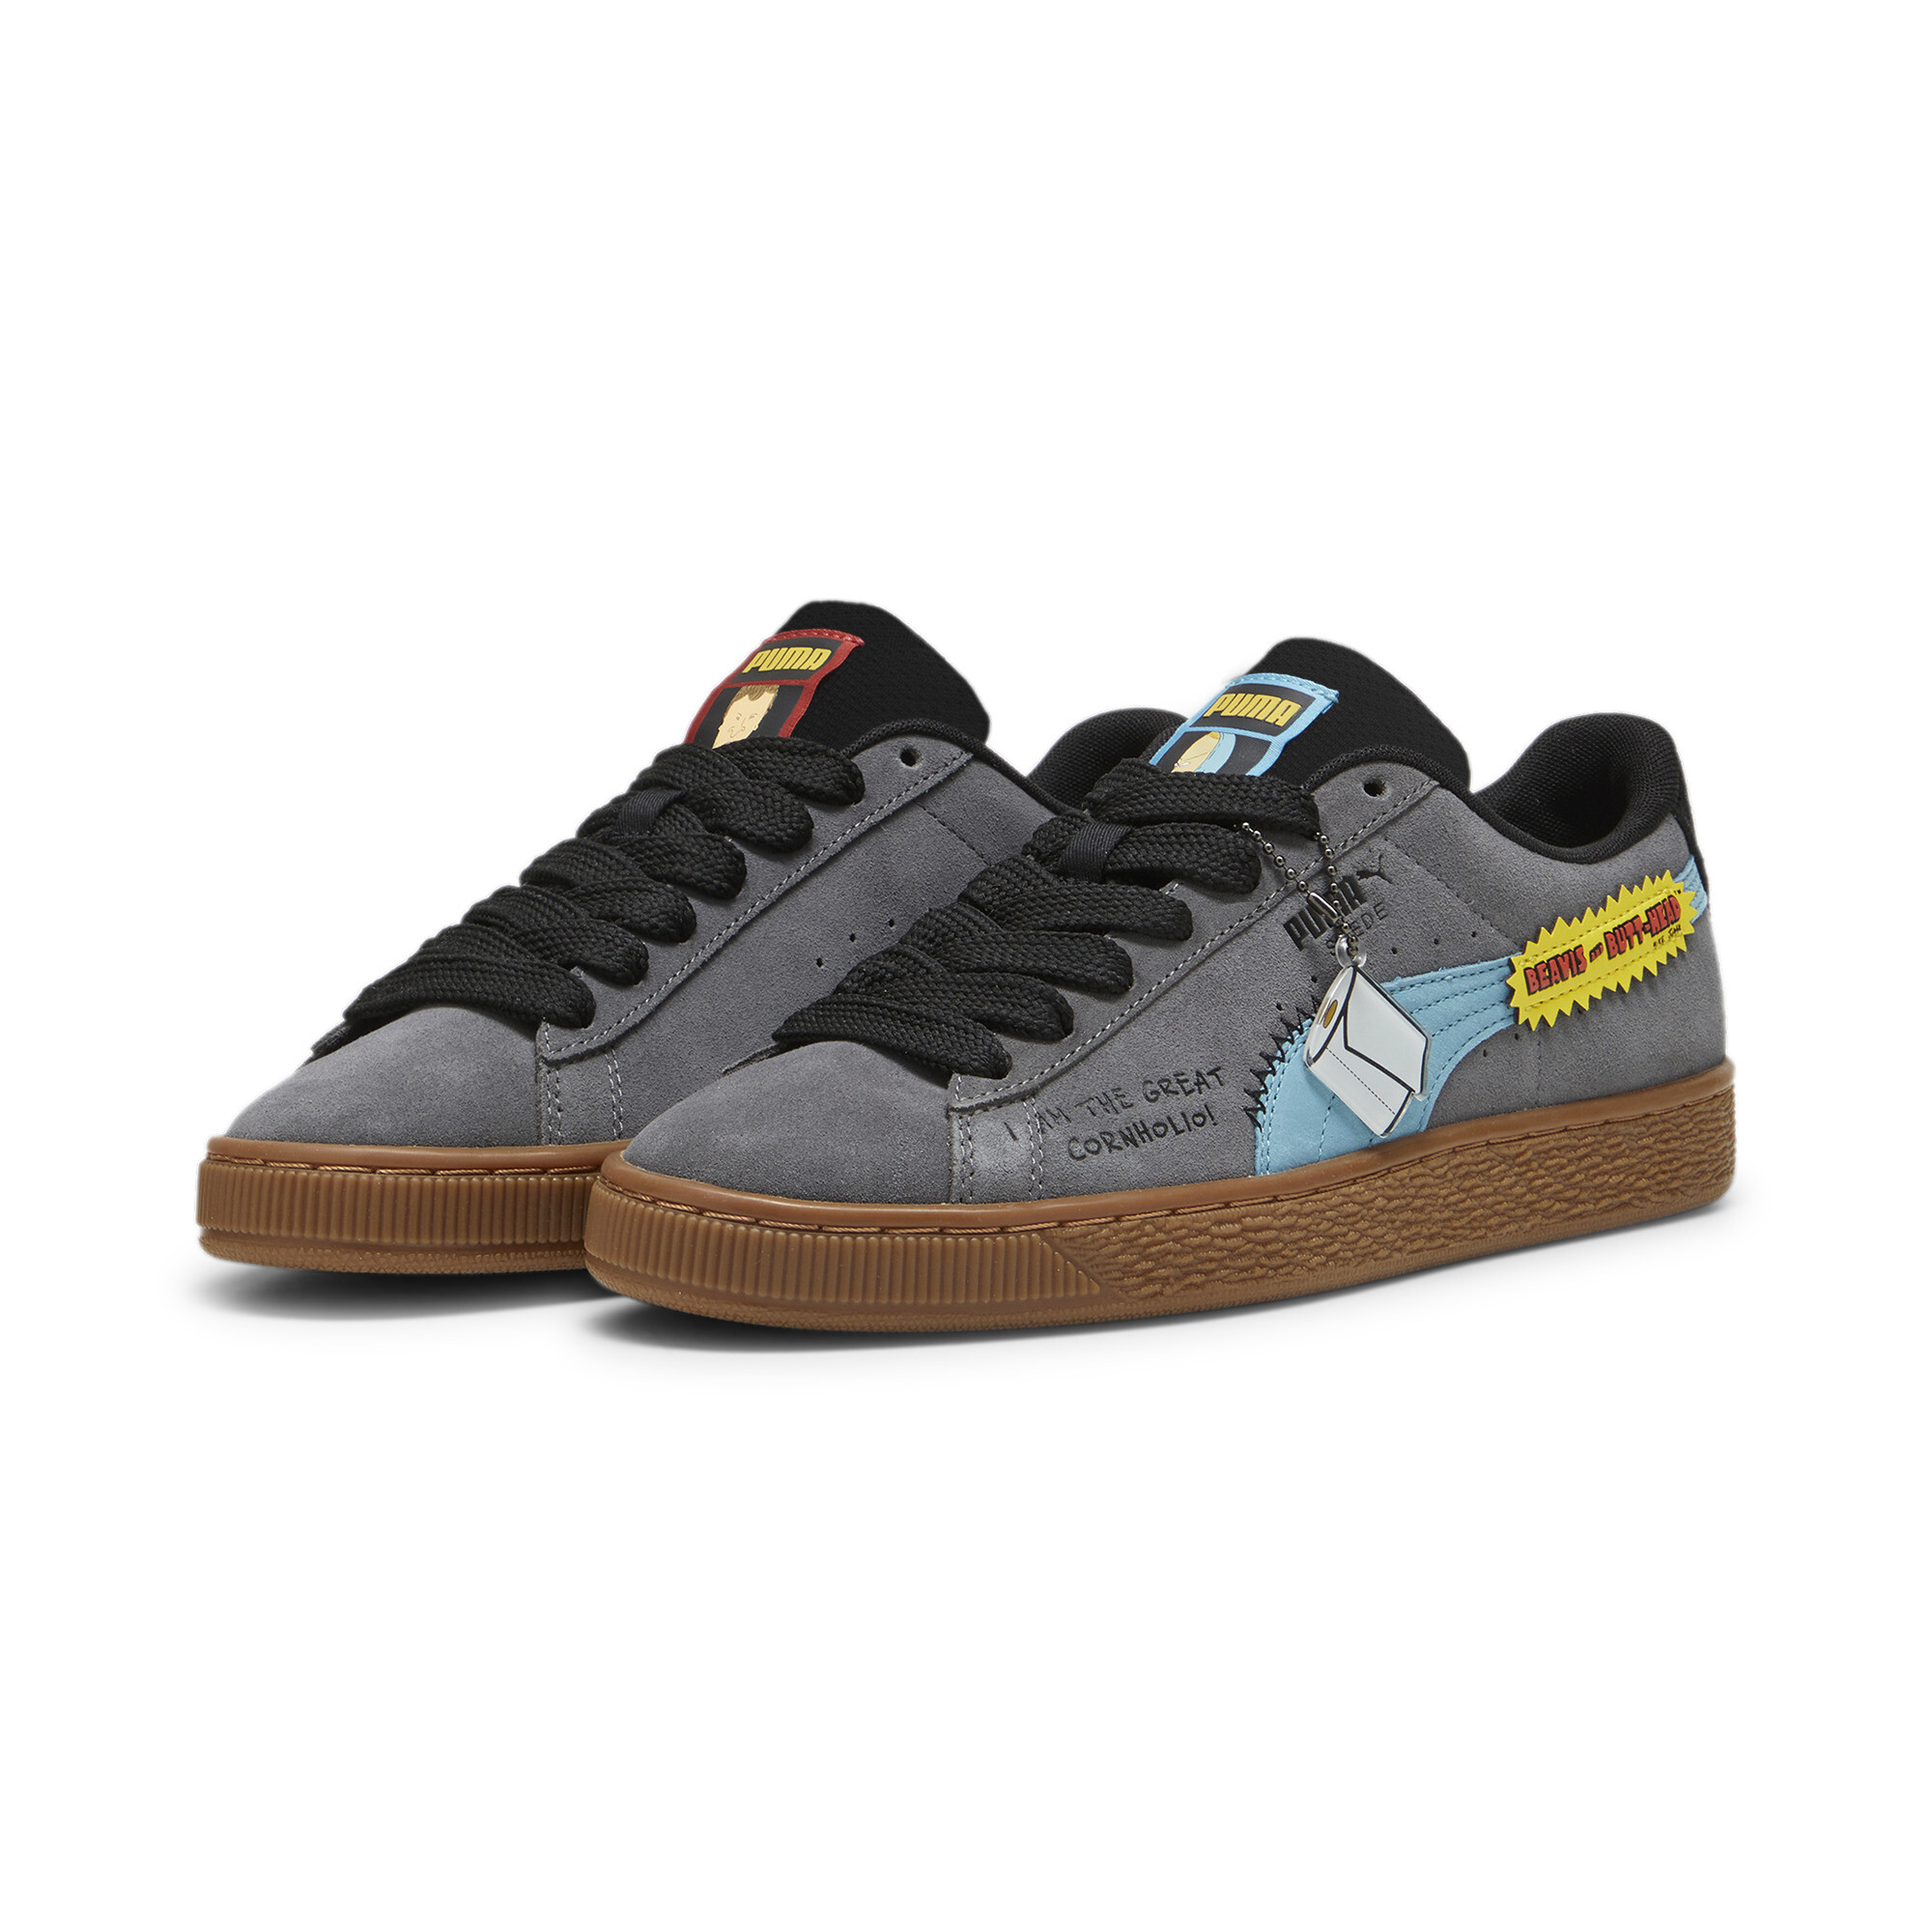 Kids' PUMA X BEAVIS AND BUTTHEAD Suede Sneakers In Gray, Size EU 45